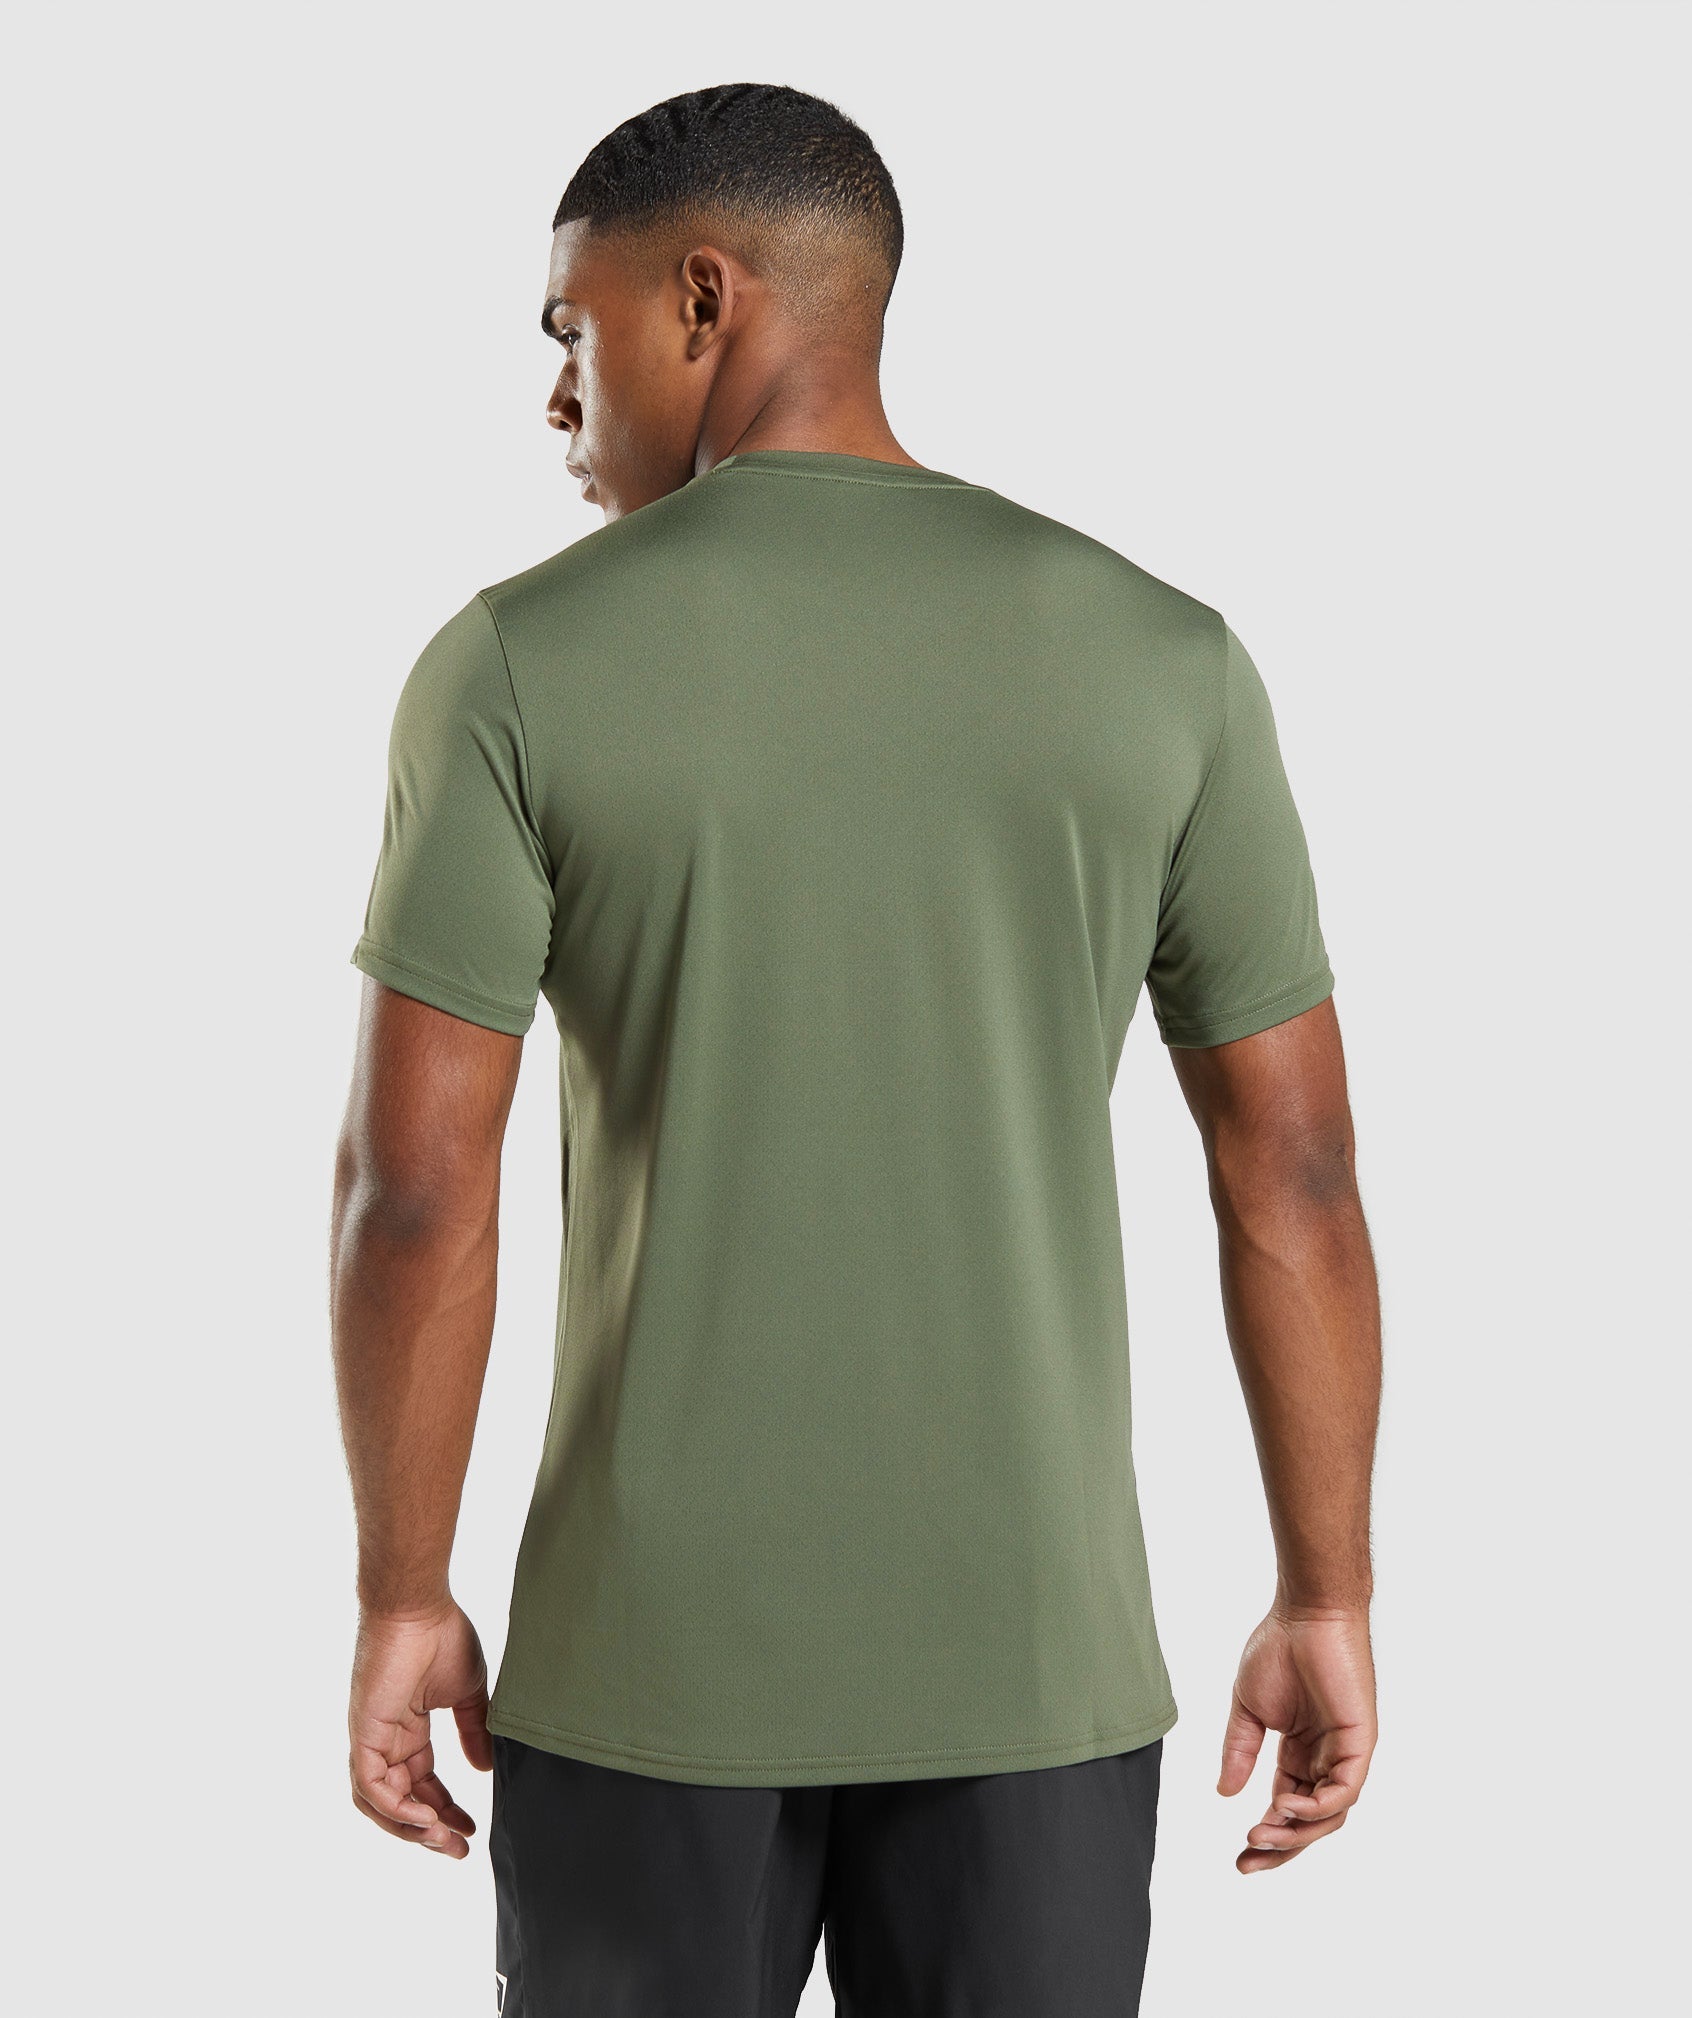 Arrival T-Shirt in Core Olive - view 3